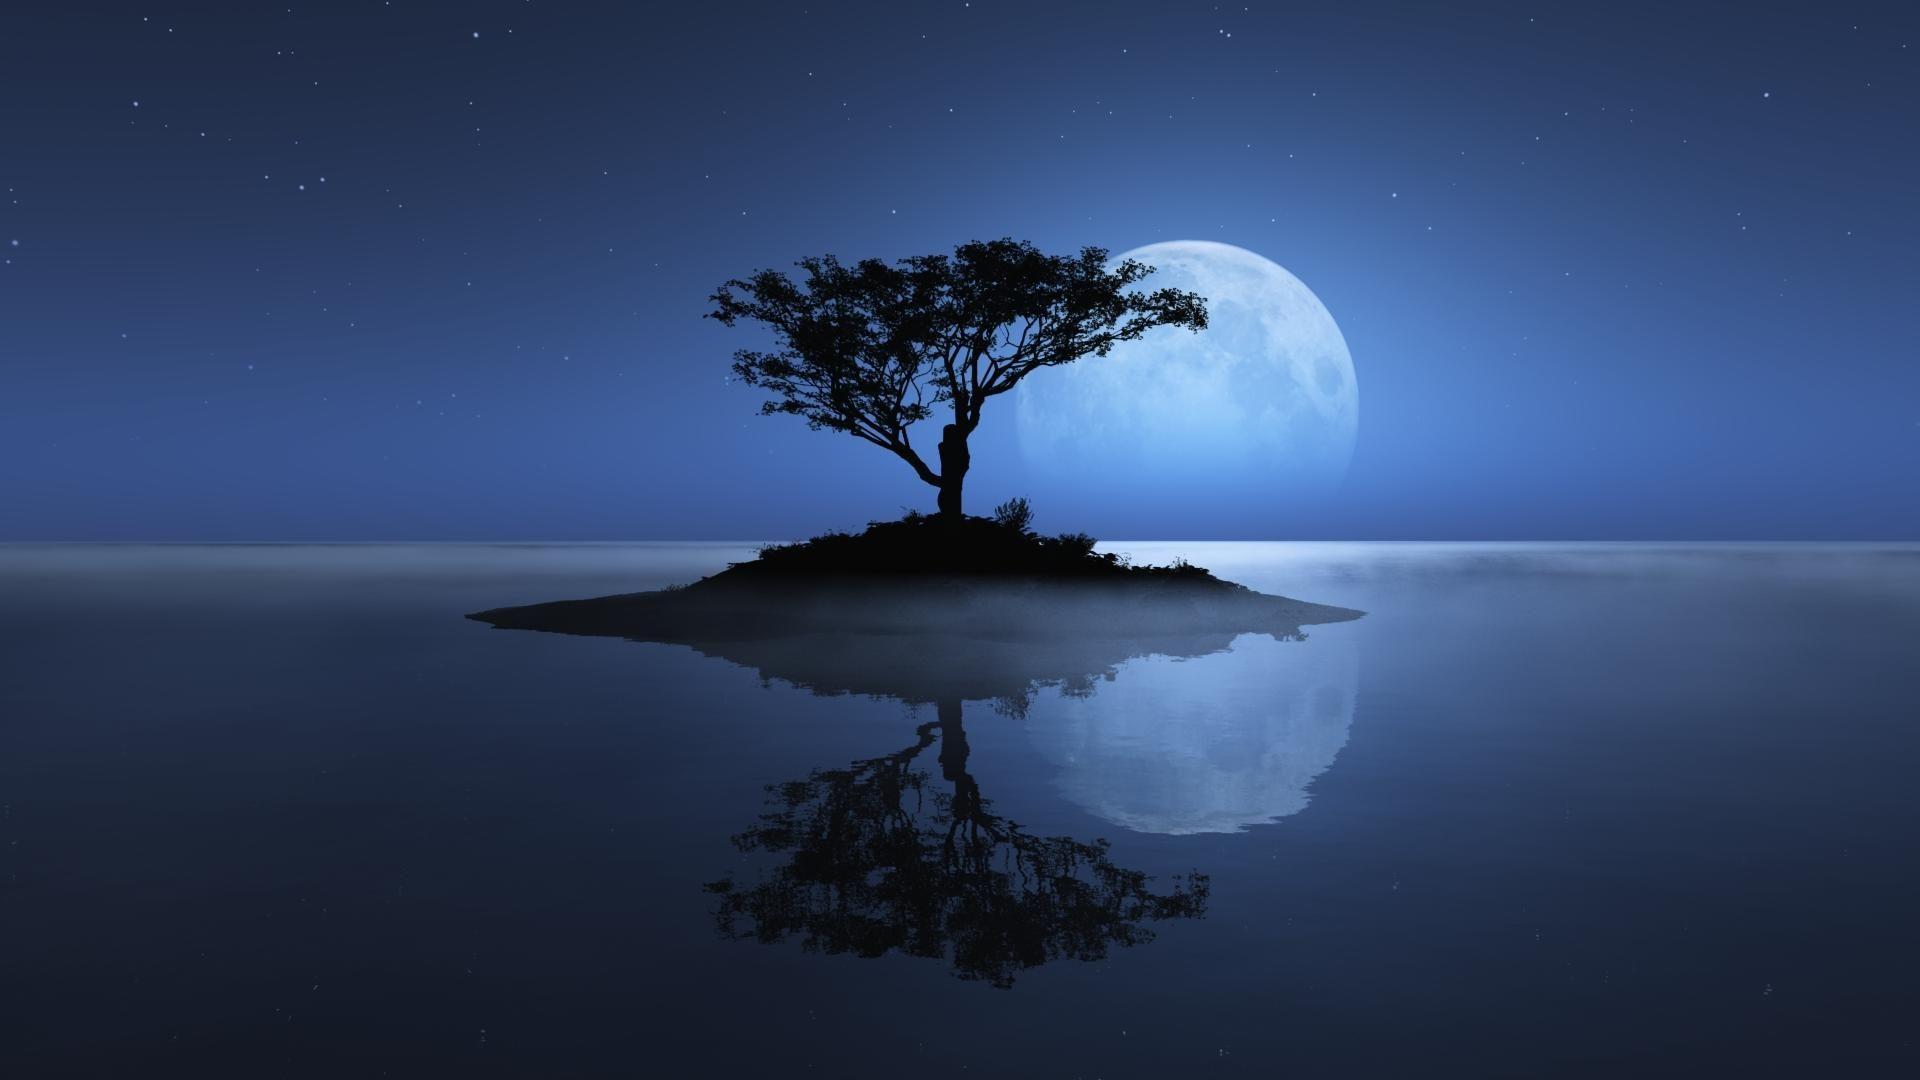 Nature Night HD Wallpapers - Wallpaper Cave